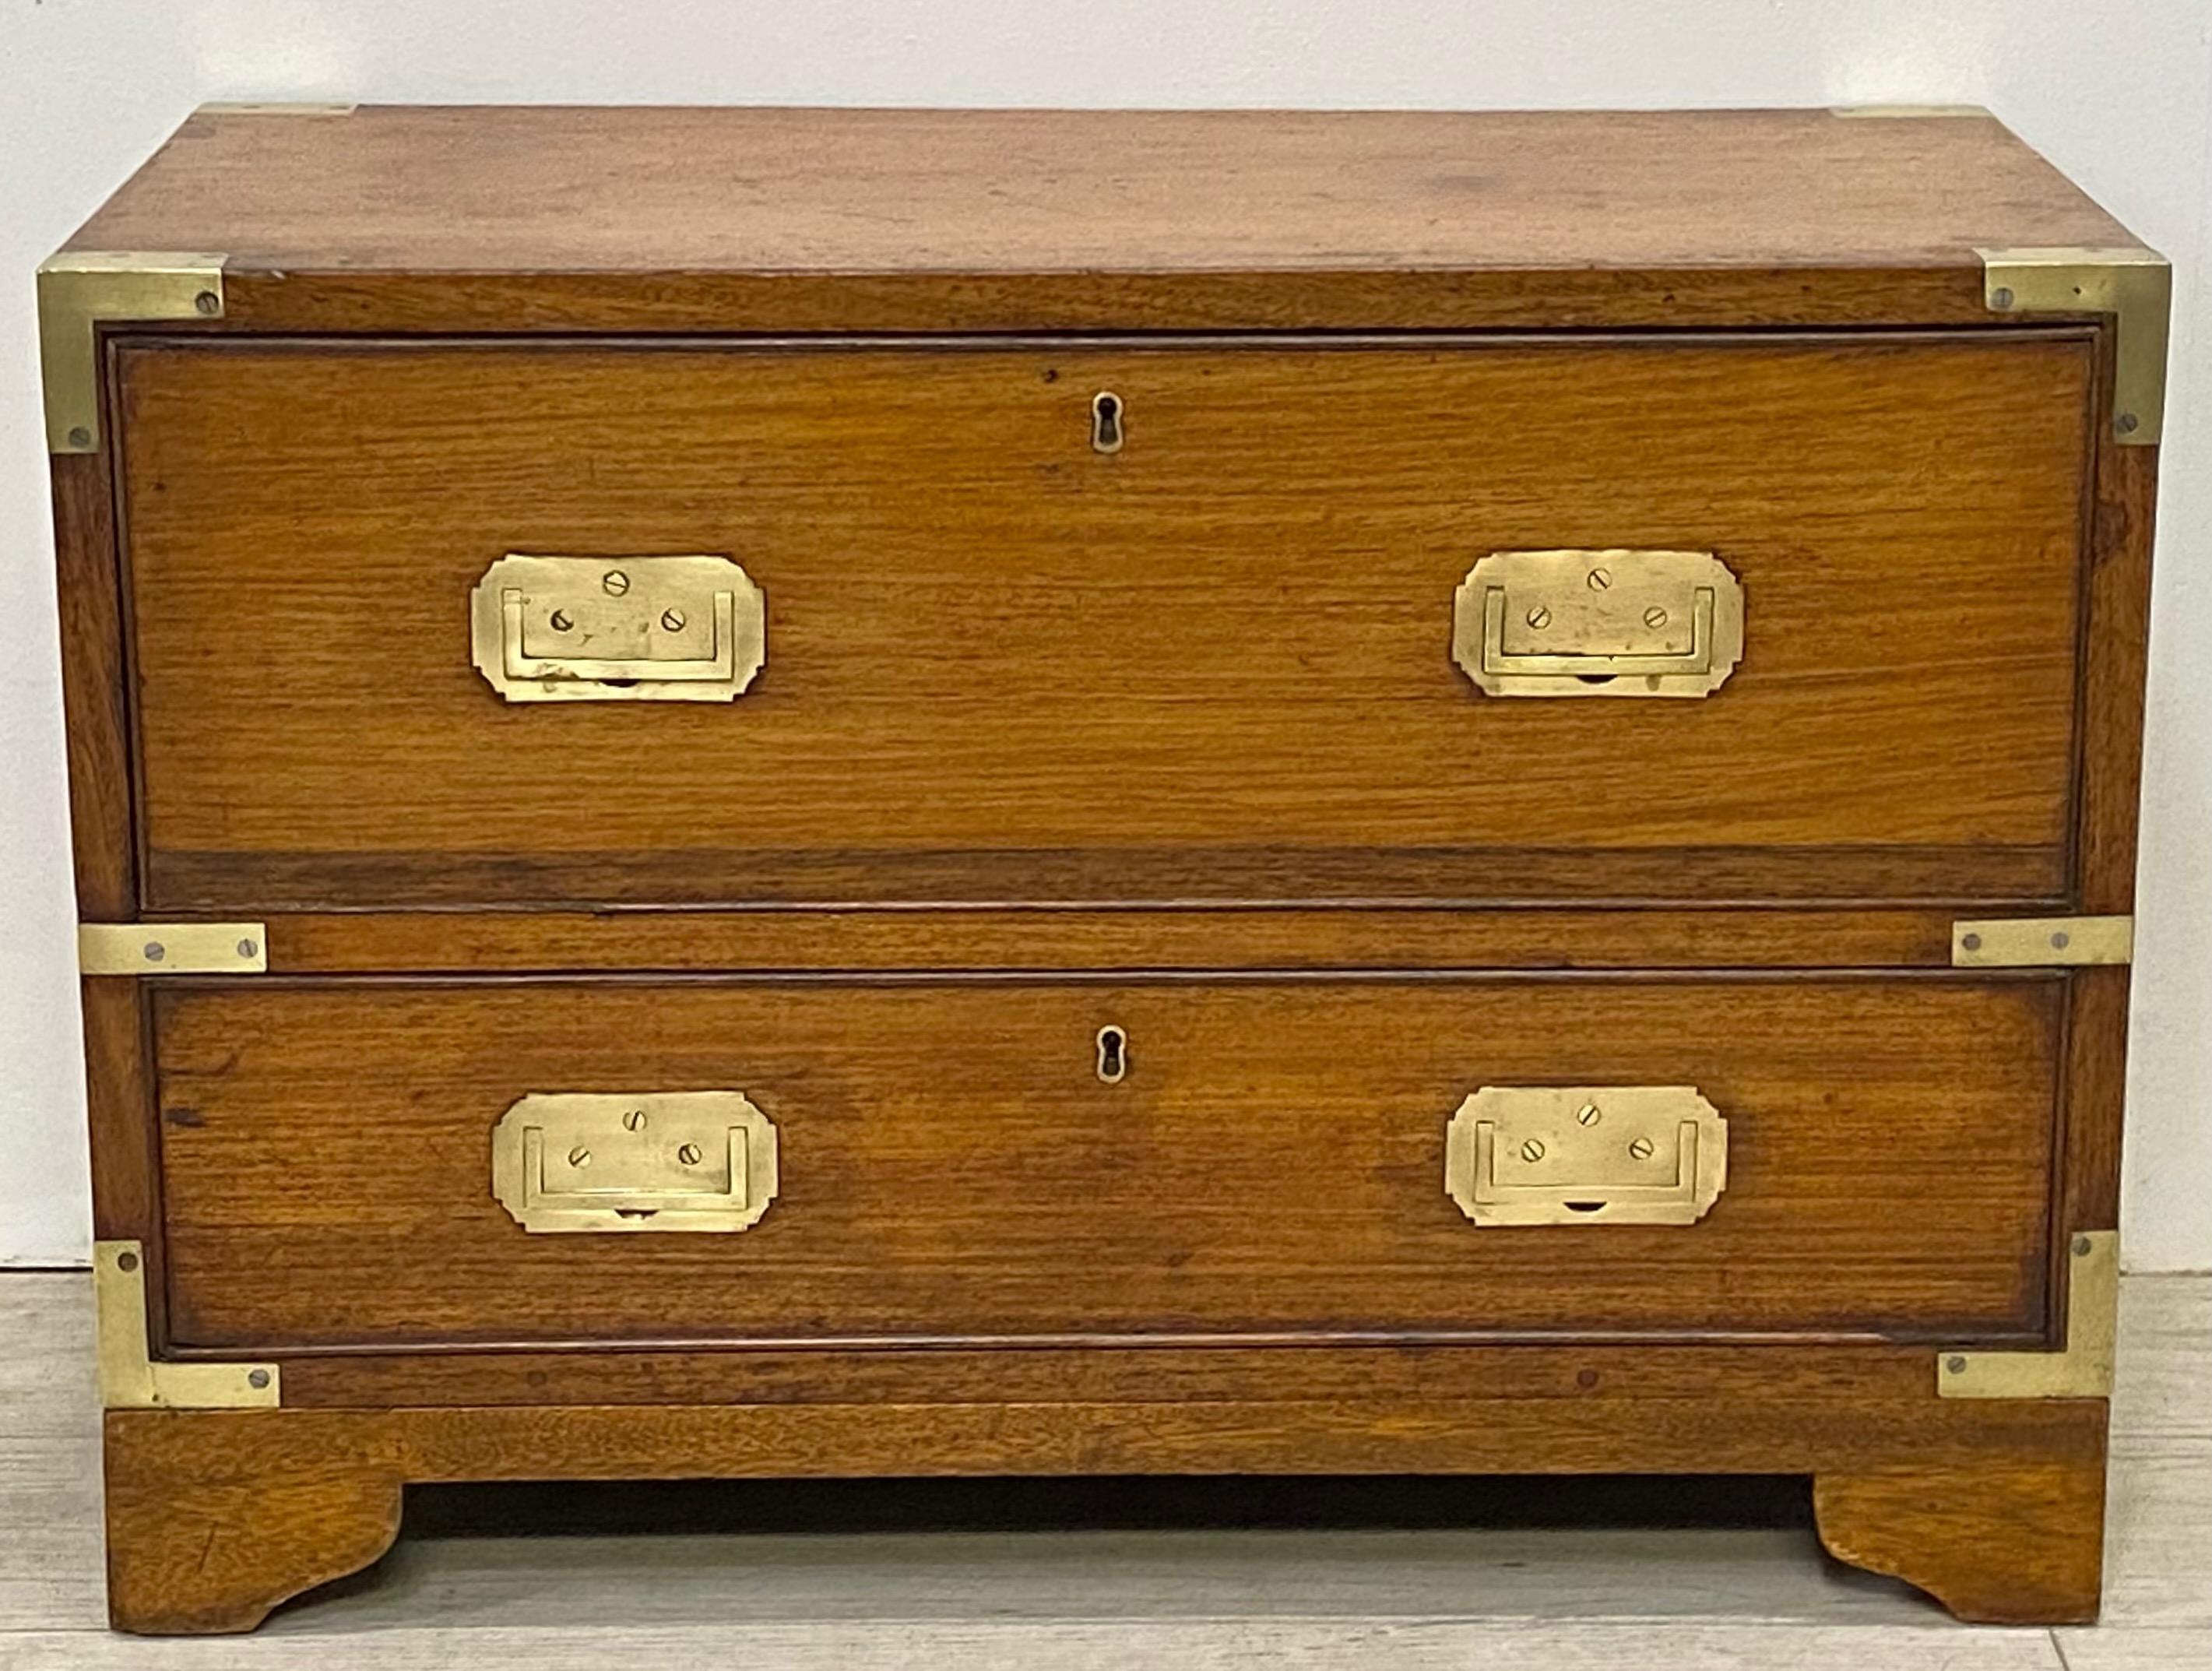 Teak wood Campaign style chest converted to a coffee table, having a mahogany fitted interior with a replaced leather writing surface, and original recessed brass hardware.
Made in China for the European English market. Early 19th century.
Chest